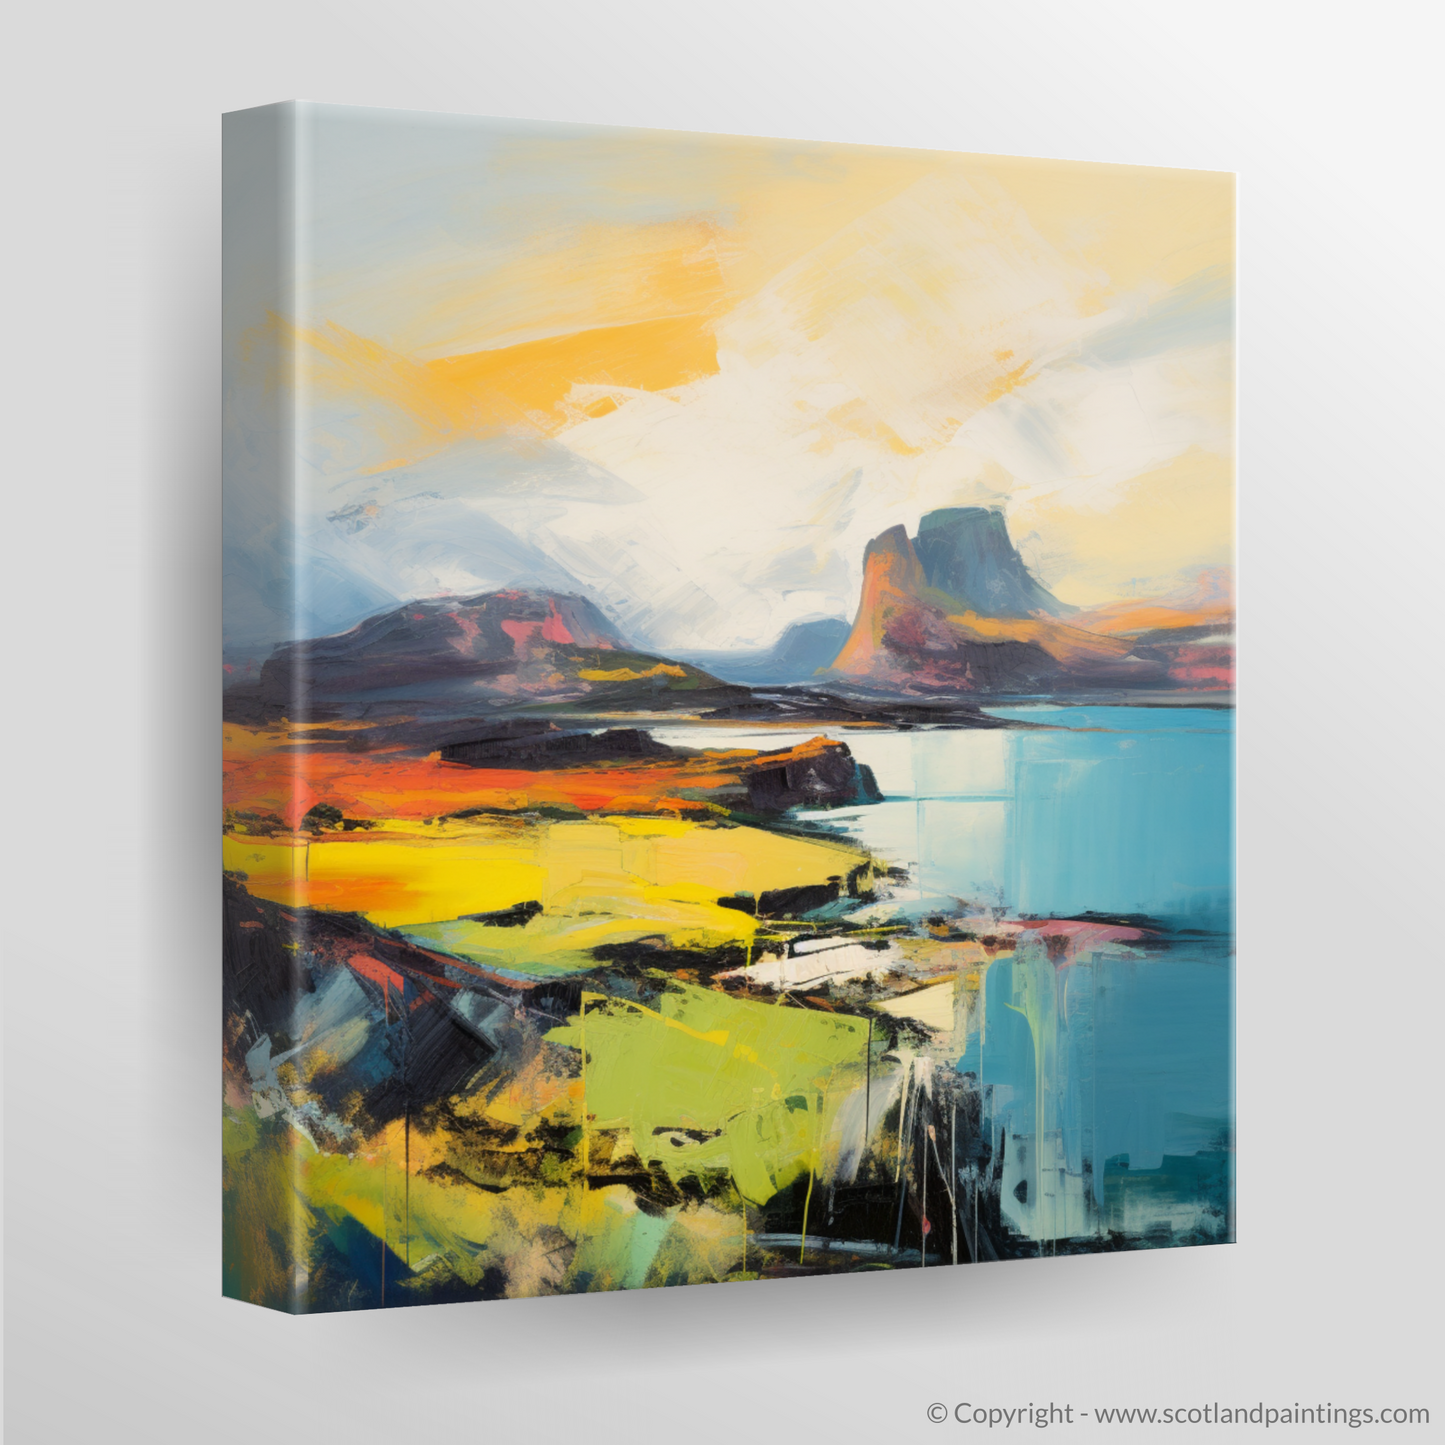 Isle of Skye Impression: An Abstract Ode to Scottish Wilderness